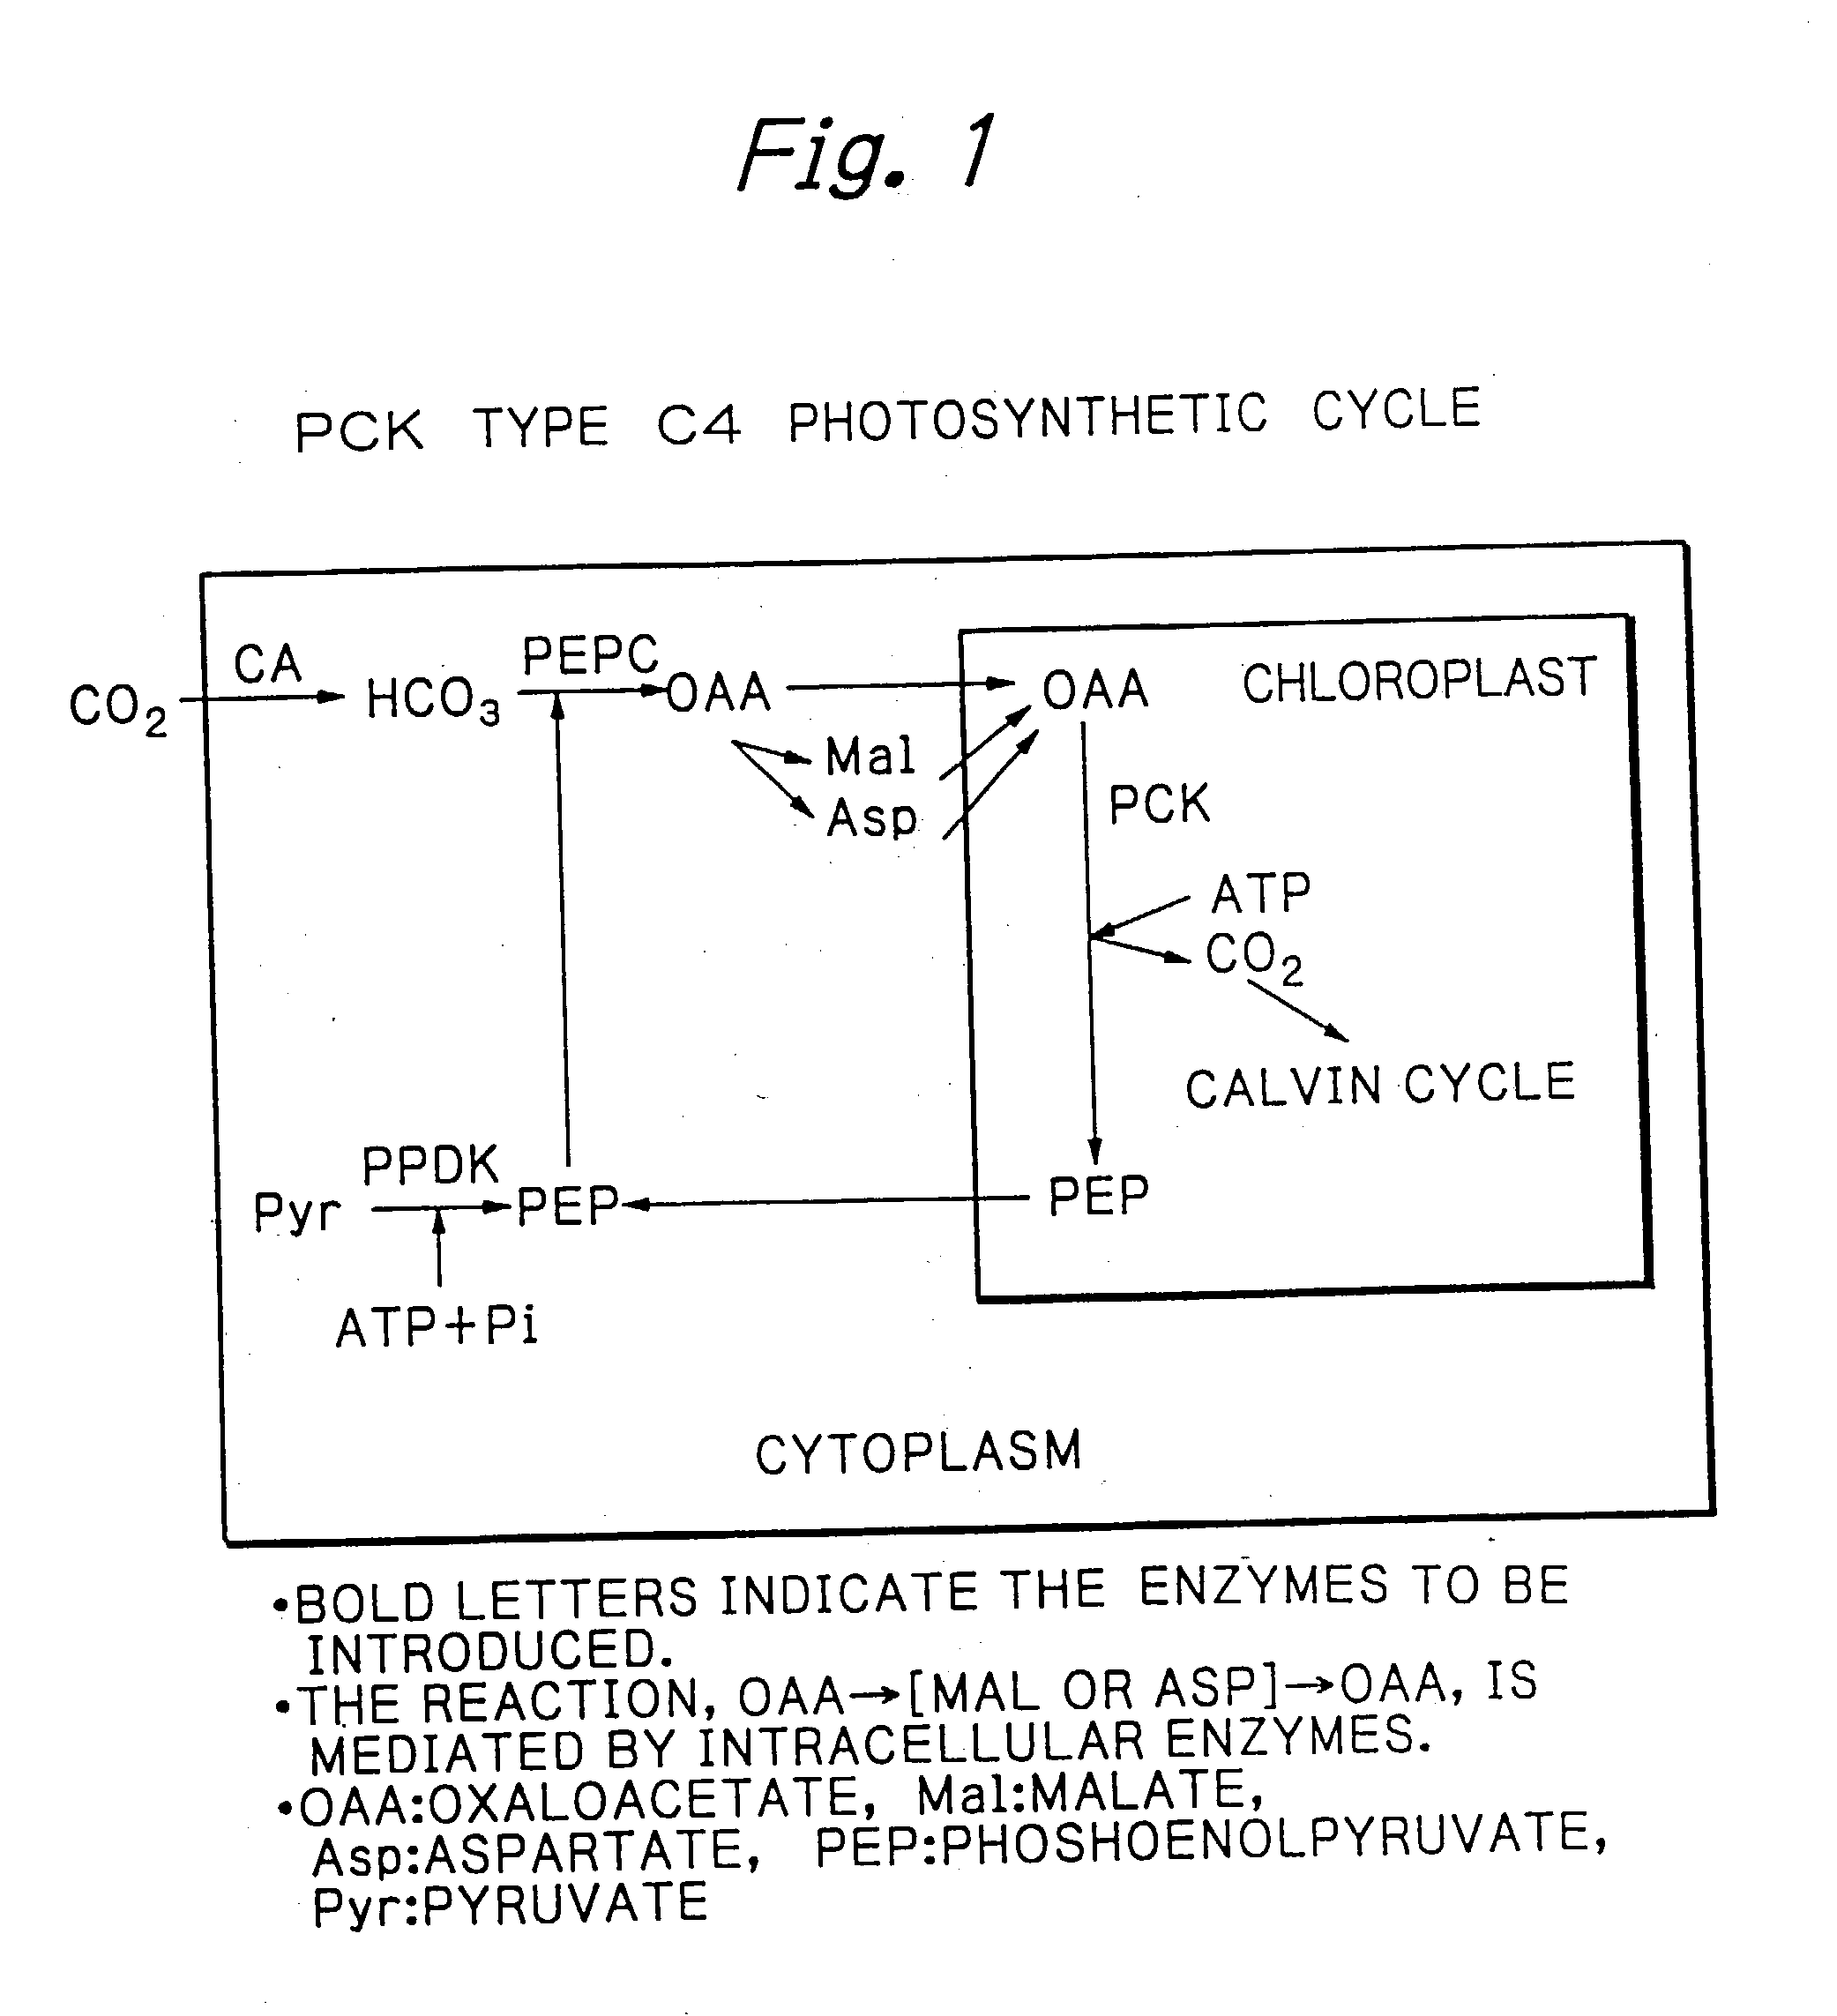 PCK-type C4 cycle